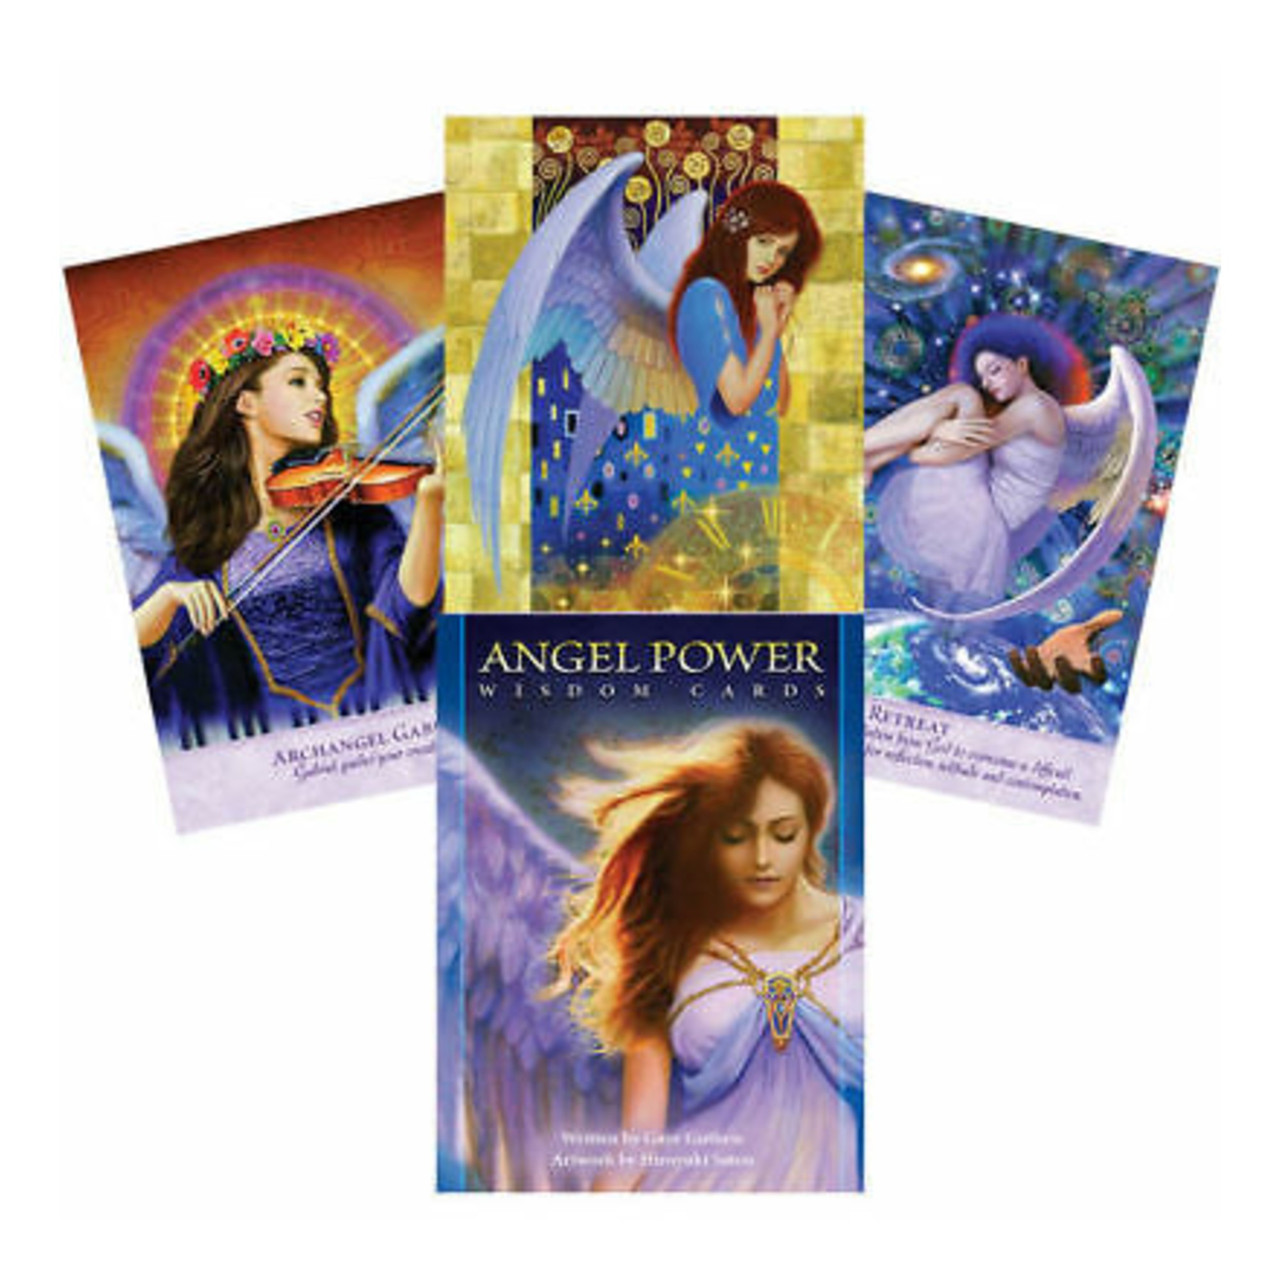 Spanish tarot cards about your life and love with angelic guidance